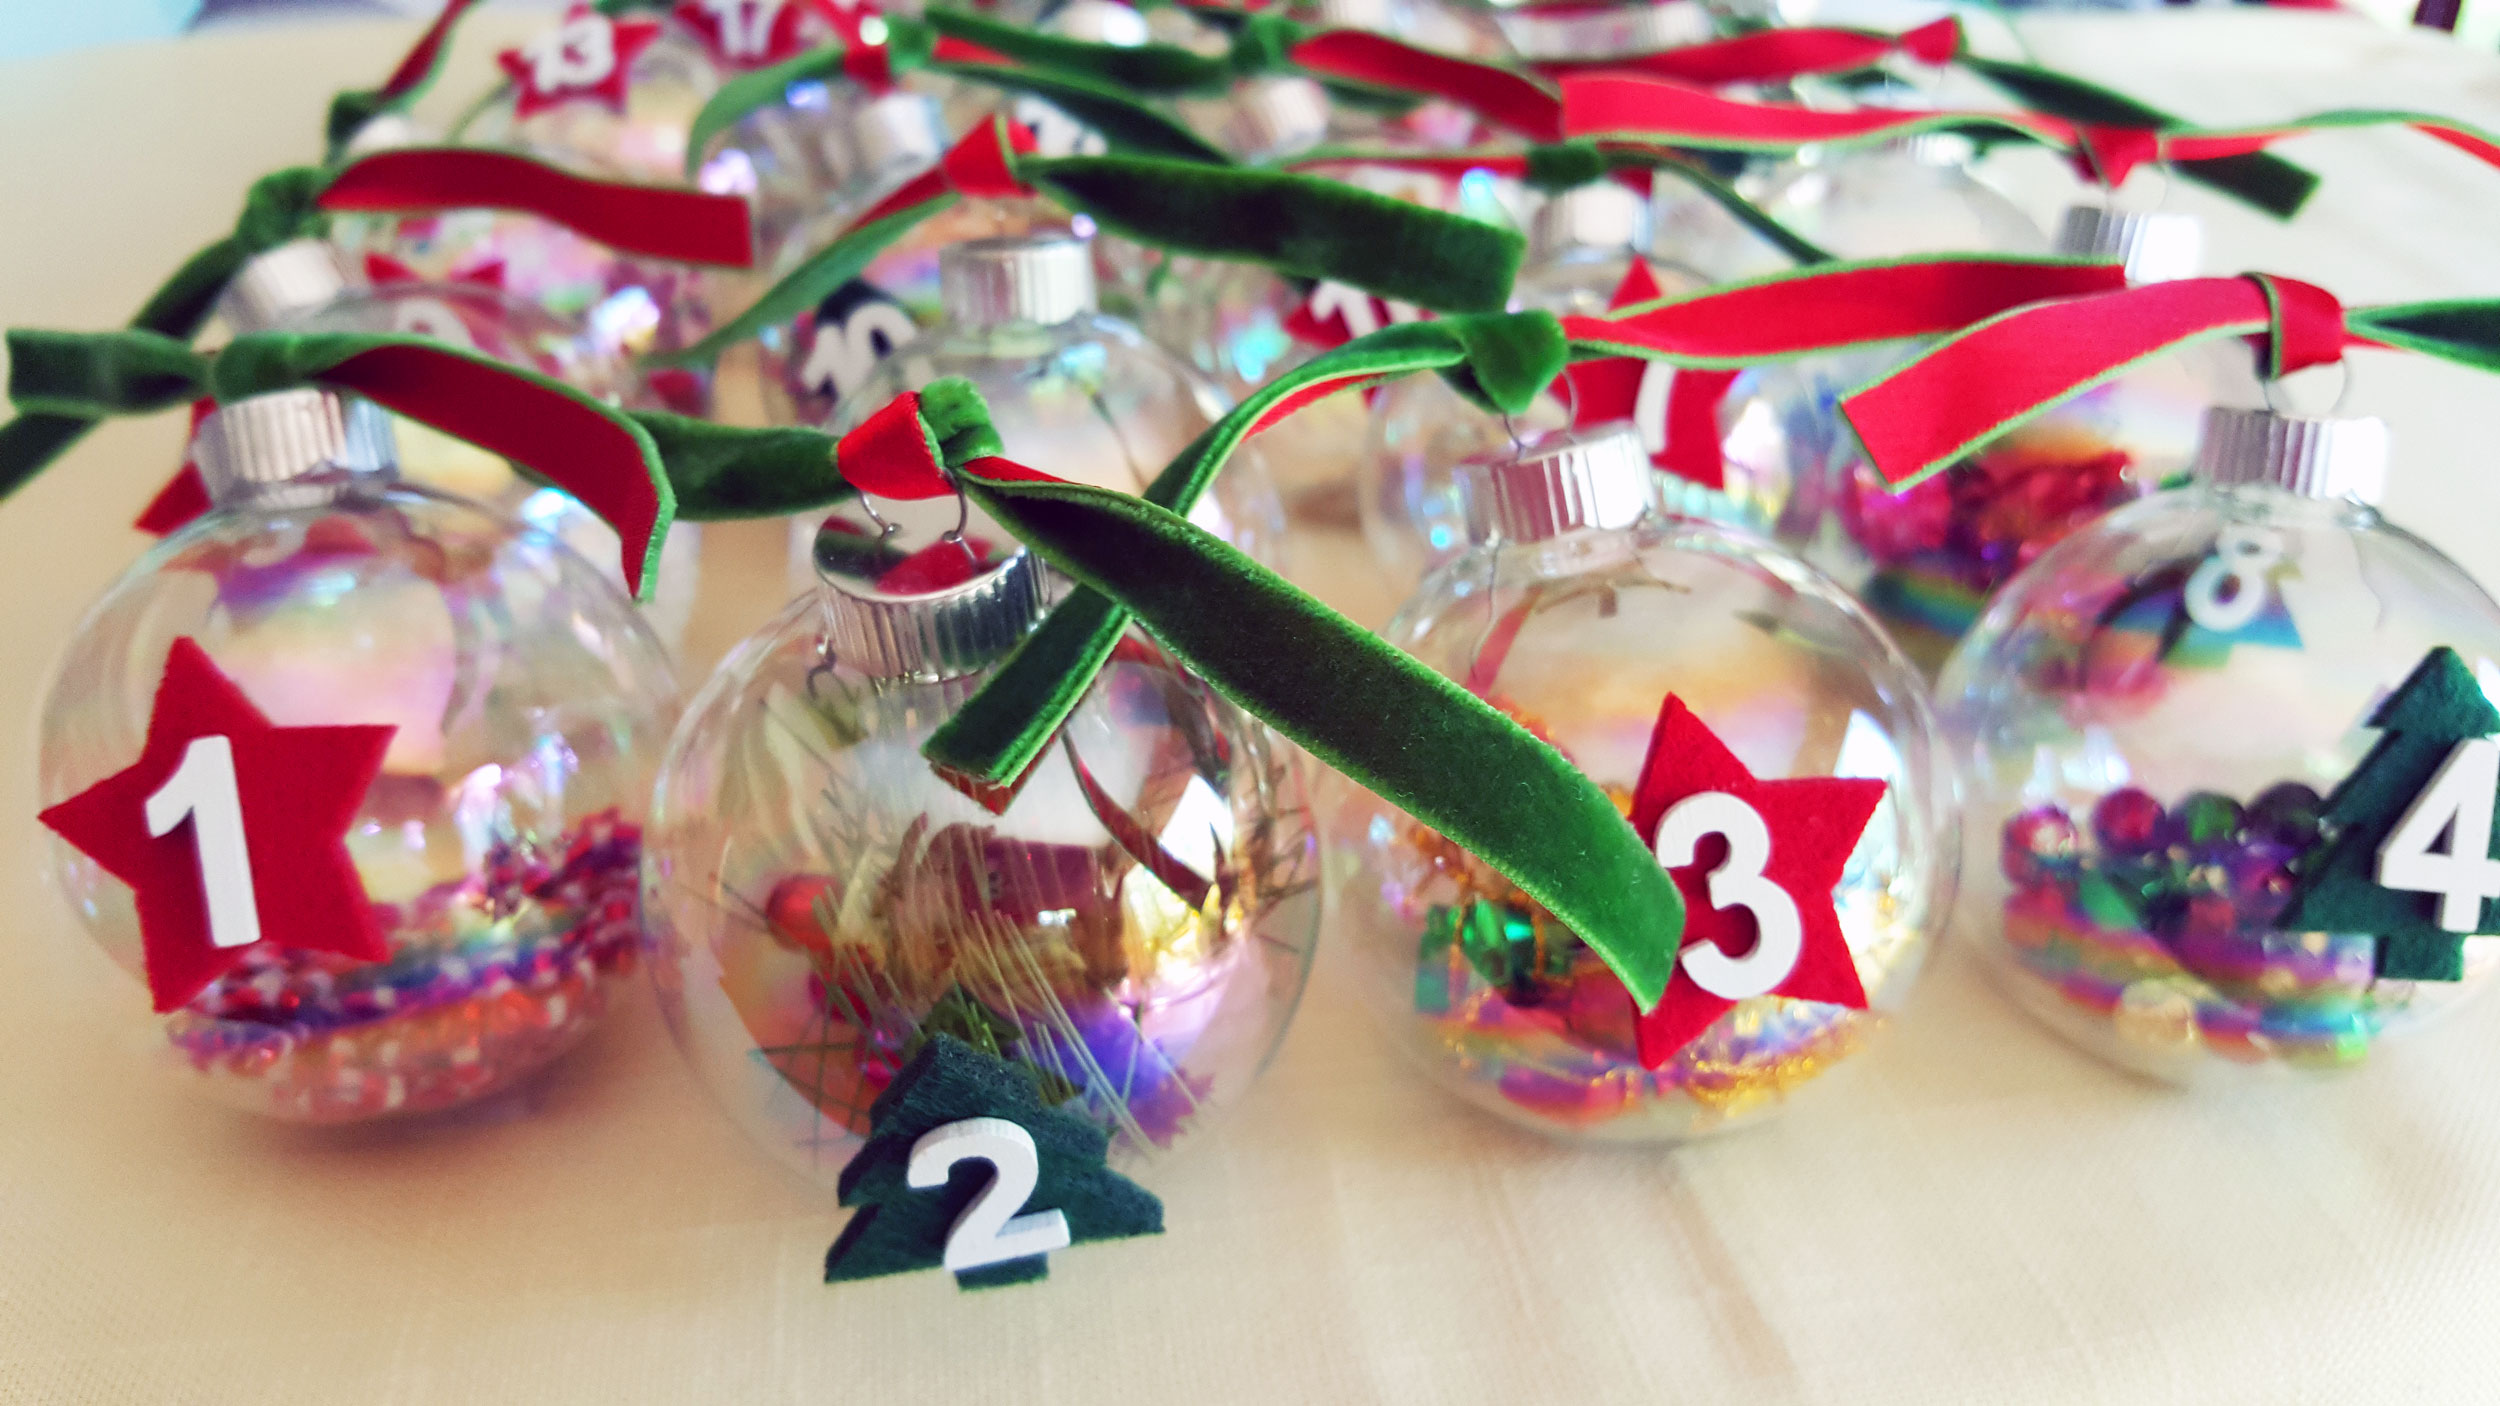 Advent Ornaments with fun unique objects in each one to count down until Christmas. | OrnamentShop.com